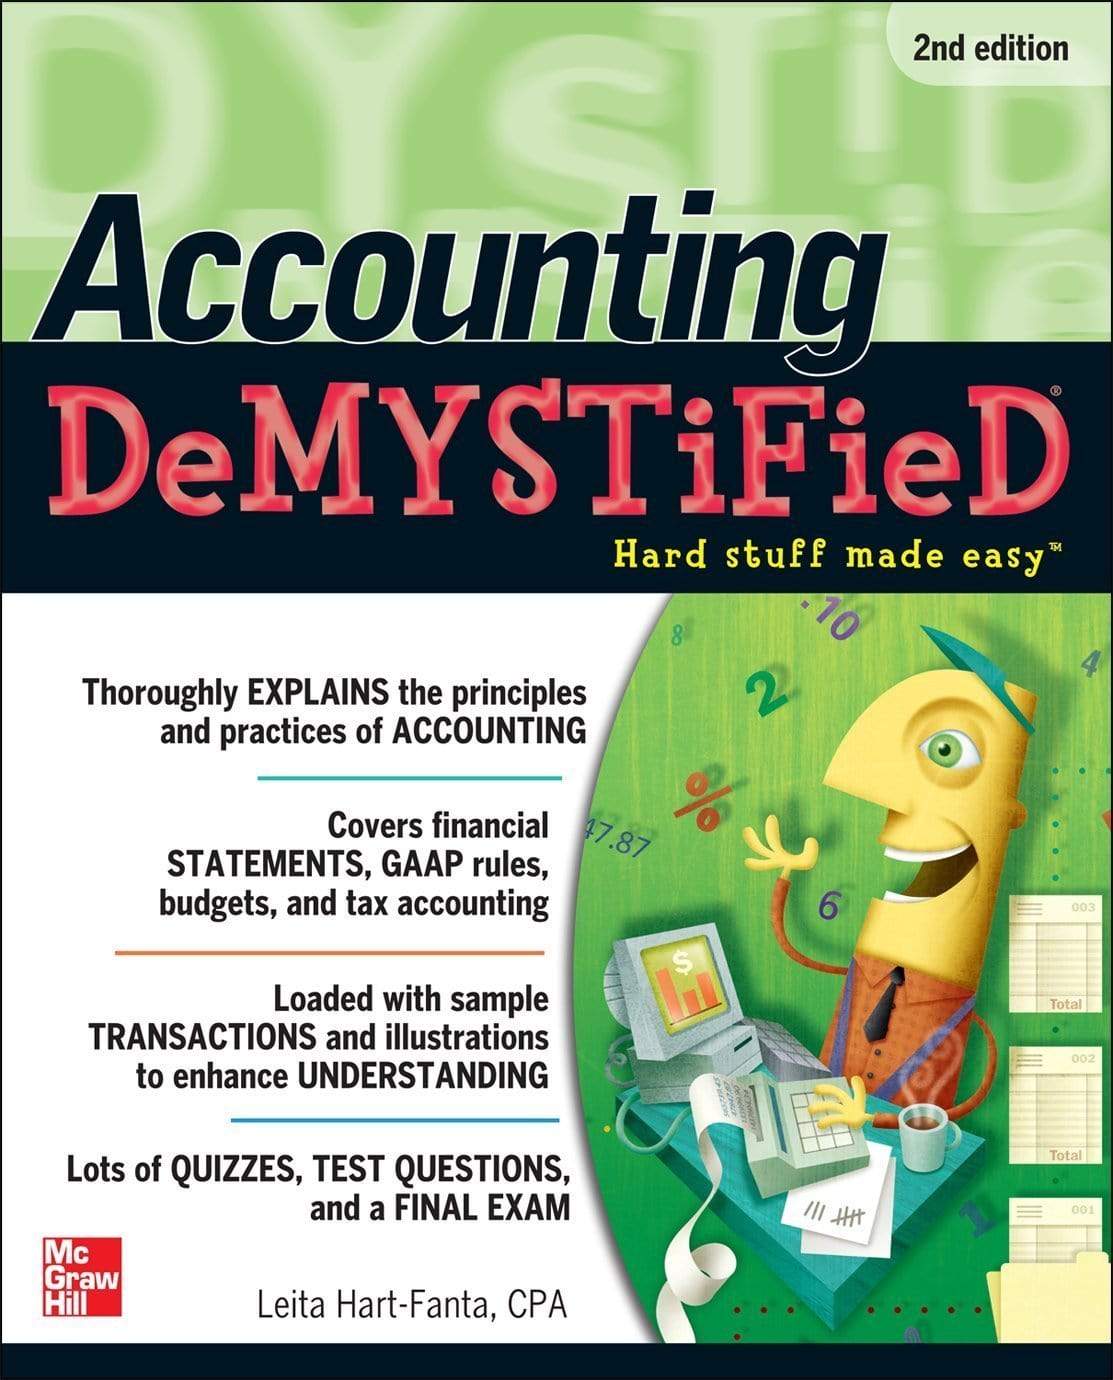 *ACCOUNTING DEMYSTIFIED